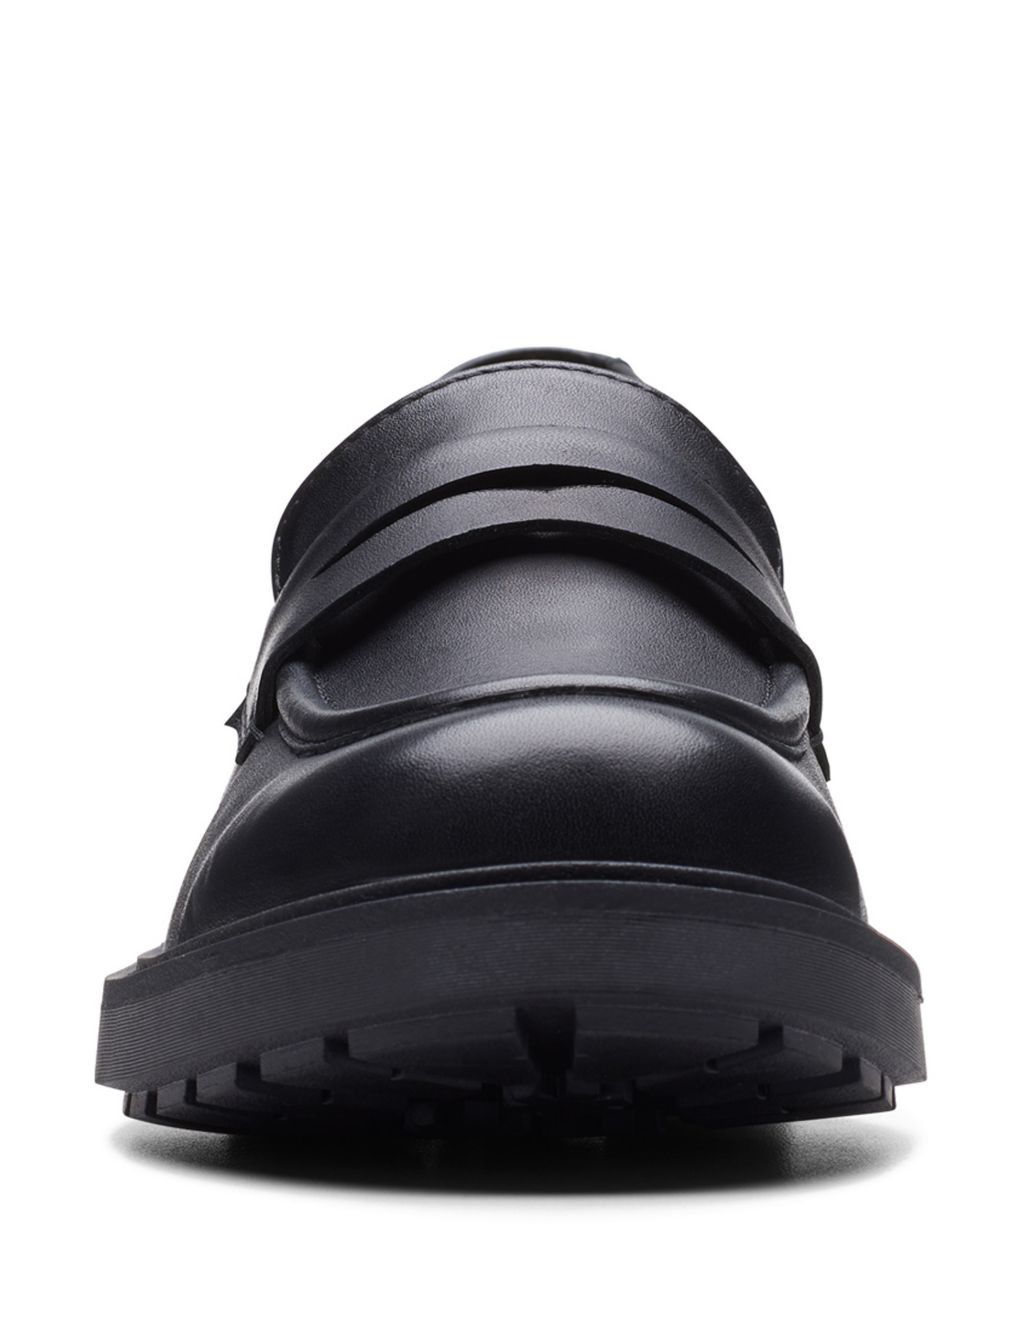 Leather Chunky Block Heel Loafers image 3